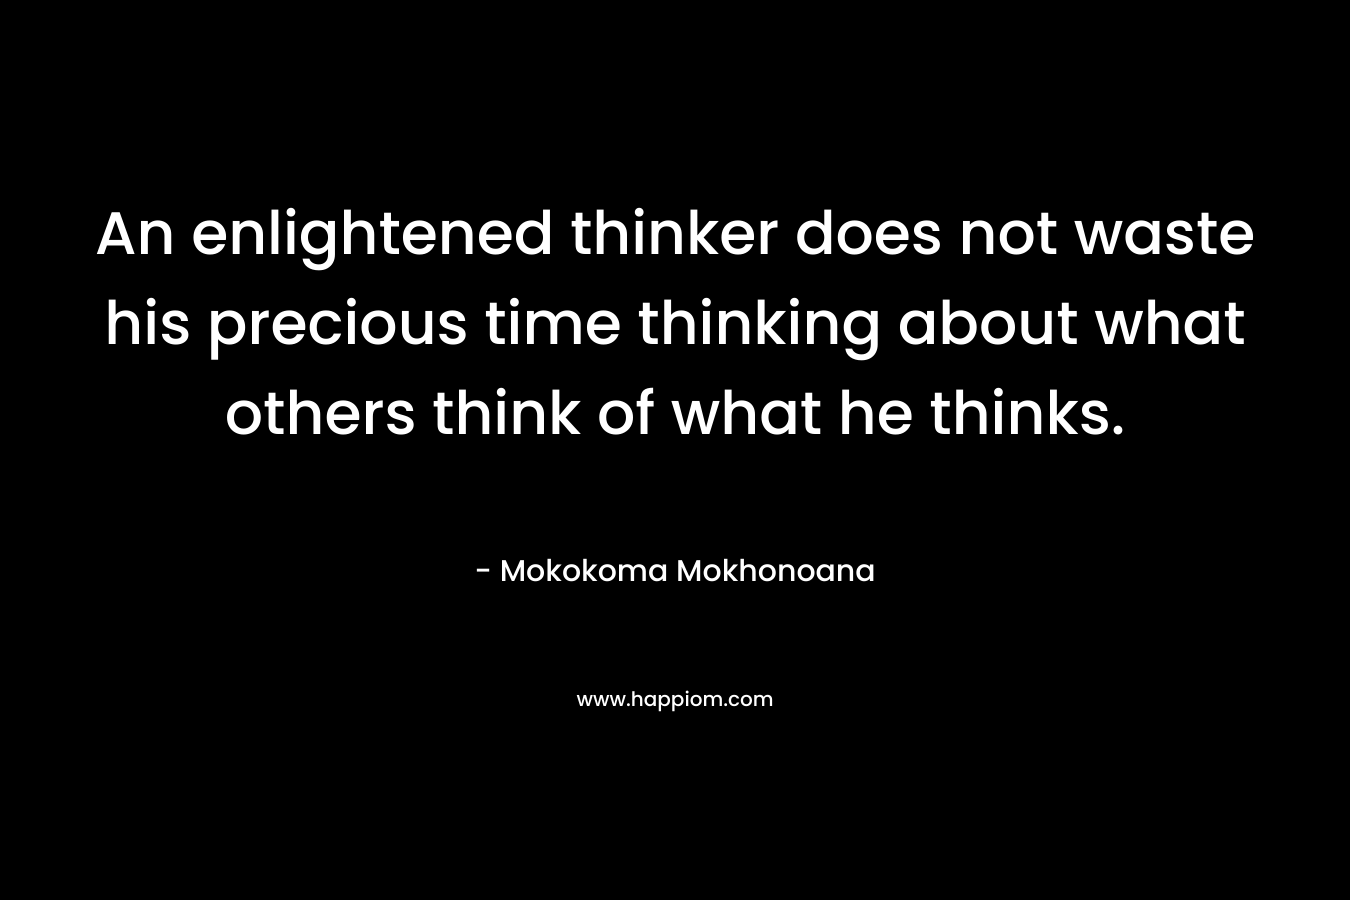 An enlightened thinker does not waste his precious time thinking about what others think of what he thinks. – Mokokoma Mokhonoana